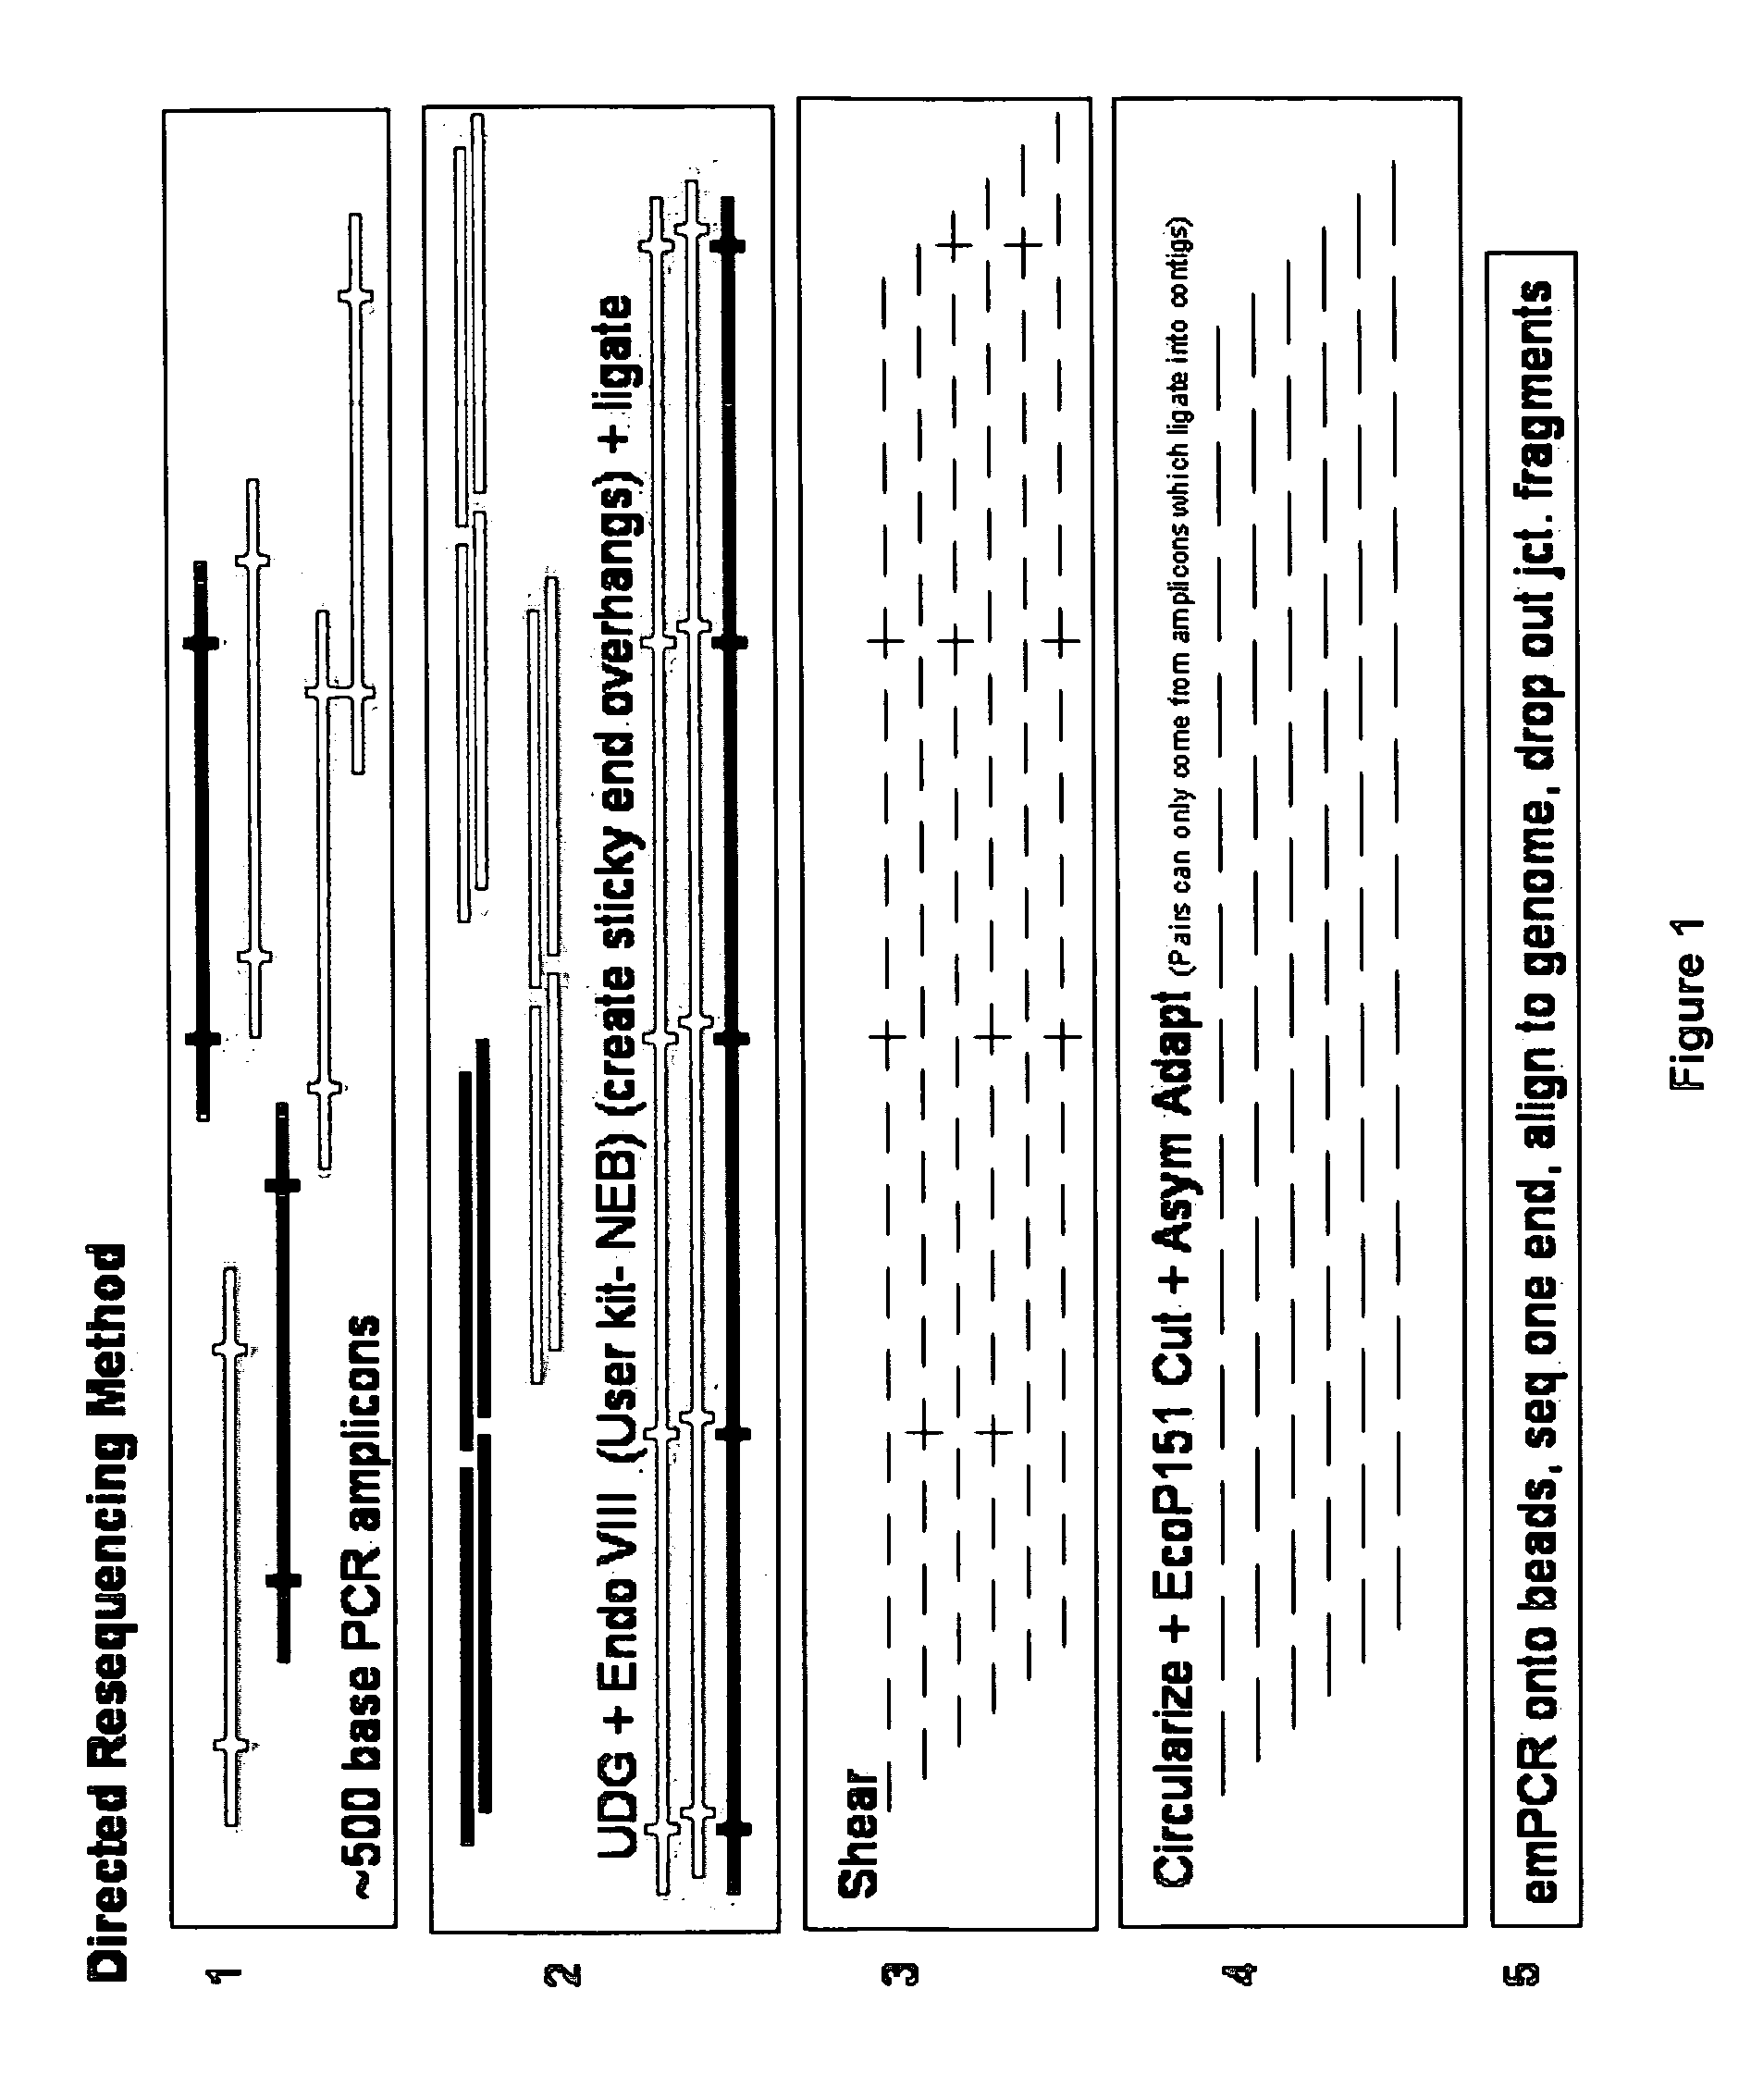 Directed assembly of amplicons to enhance read pairing signature with massively parallel short read sequencers